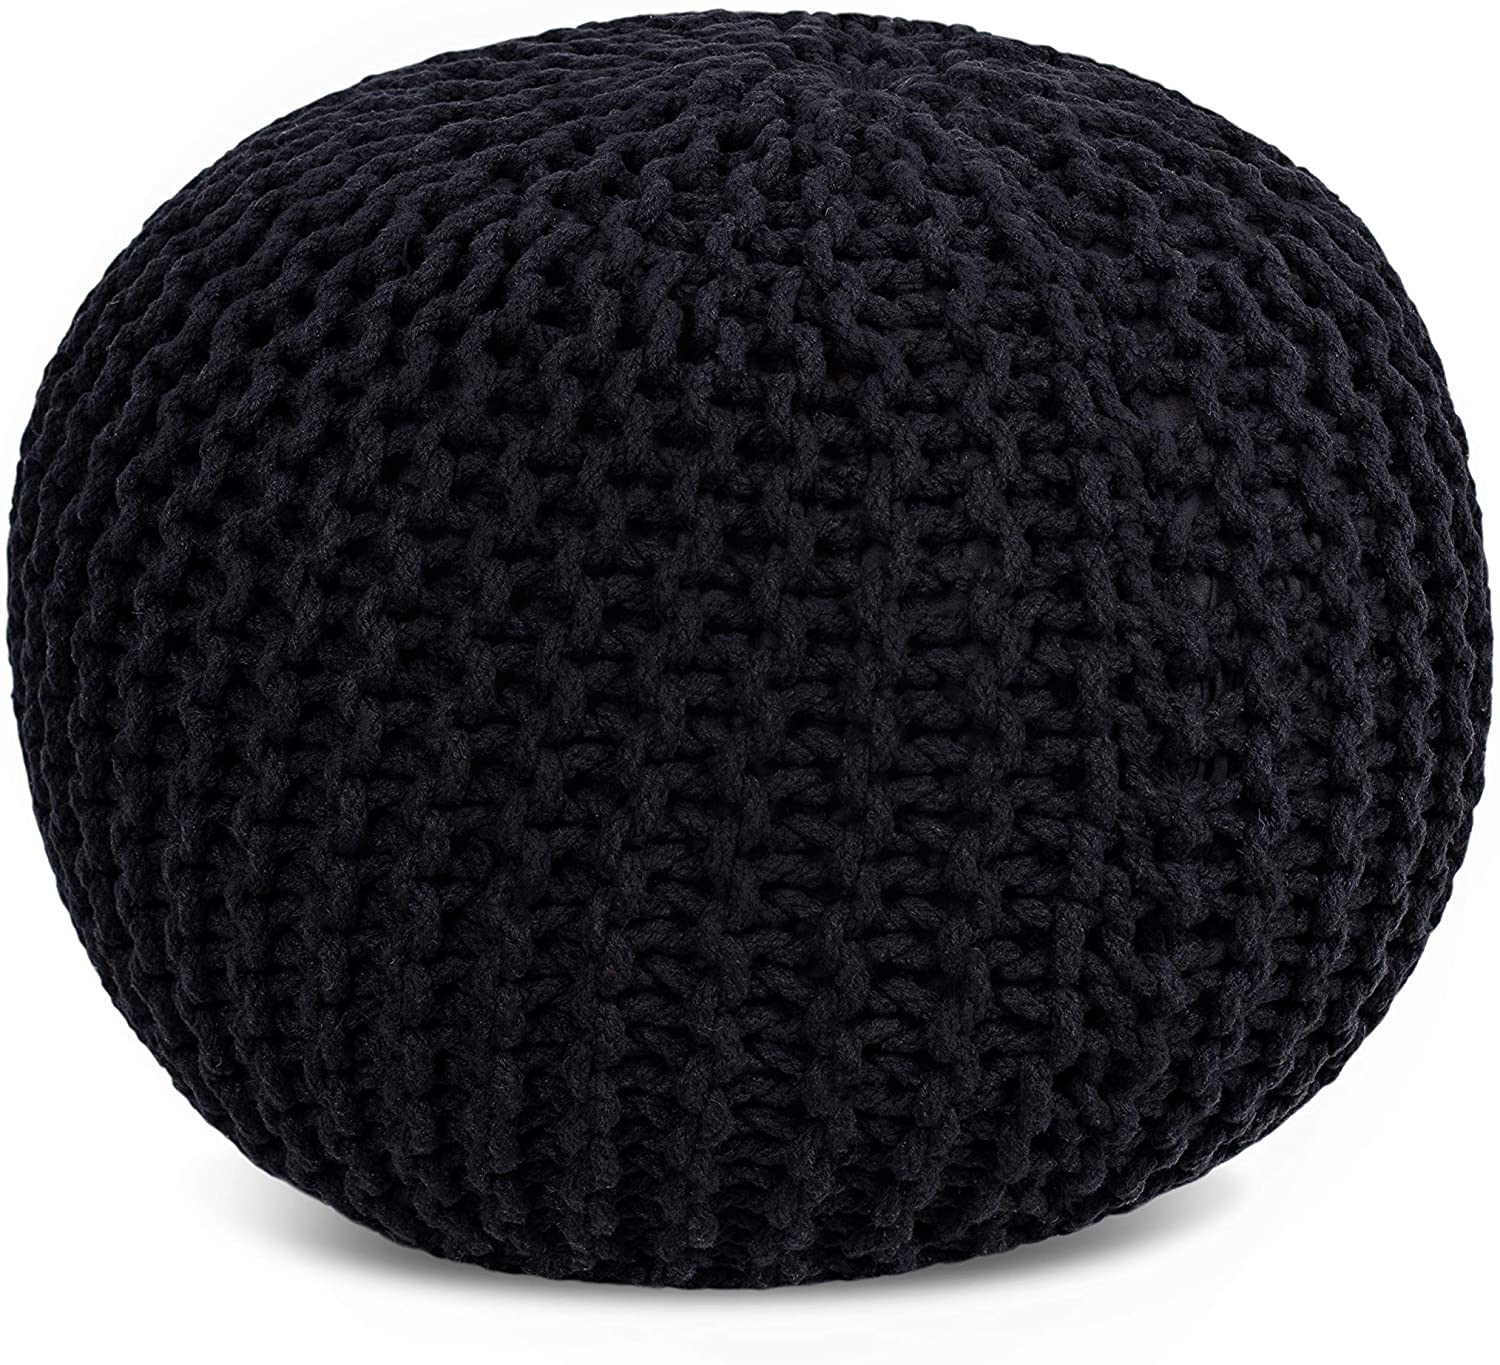 BirdRock Home Hand-Knitted Compact Pouf